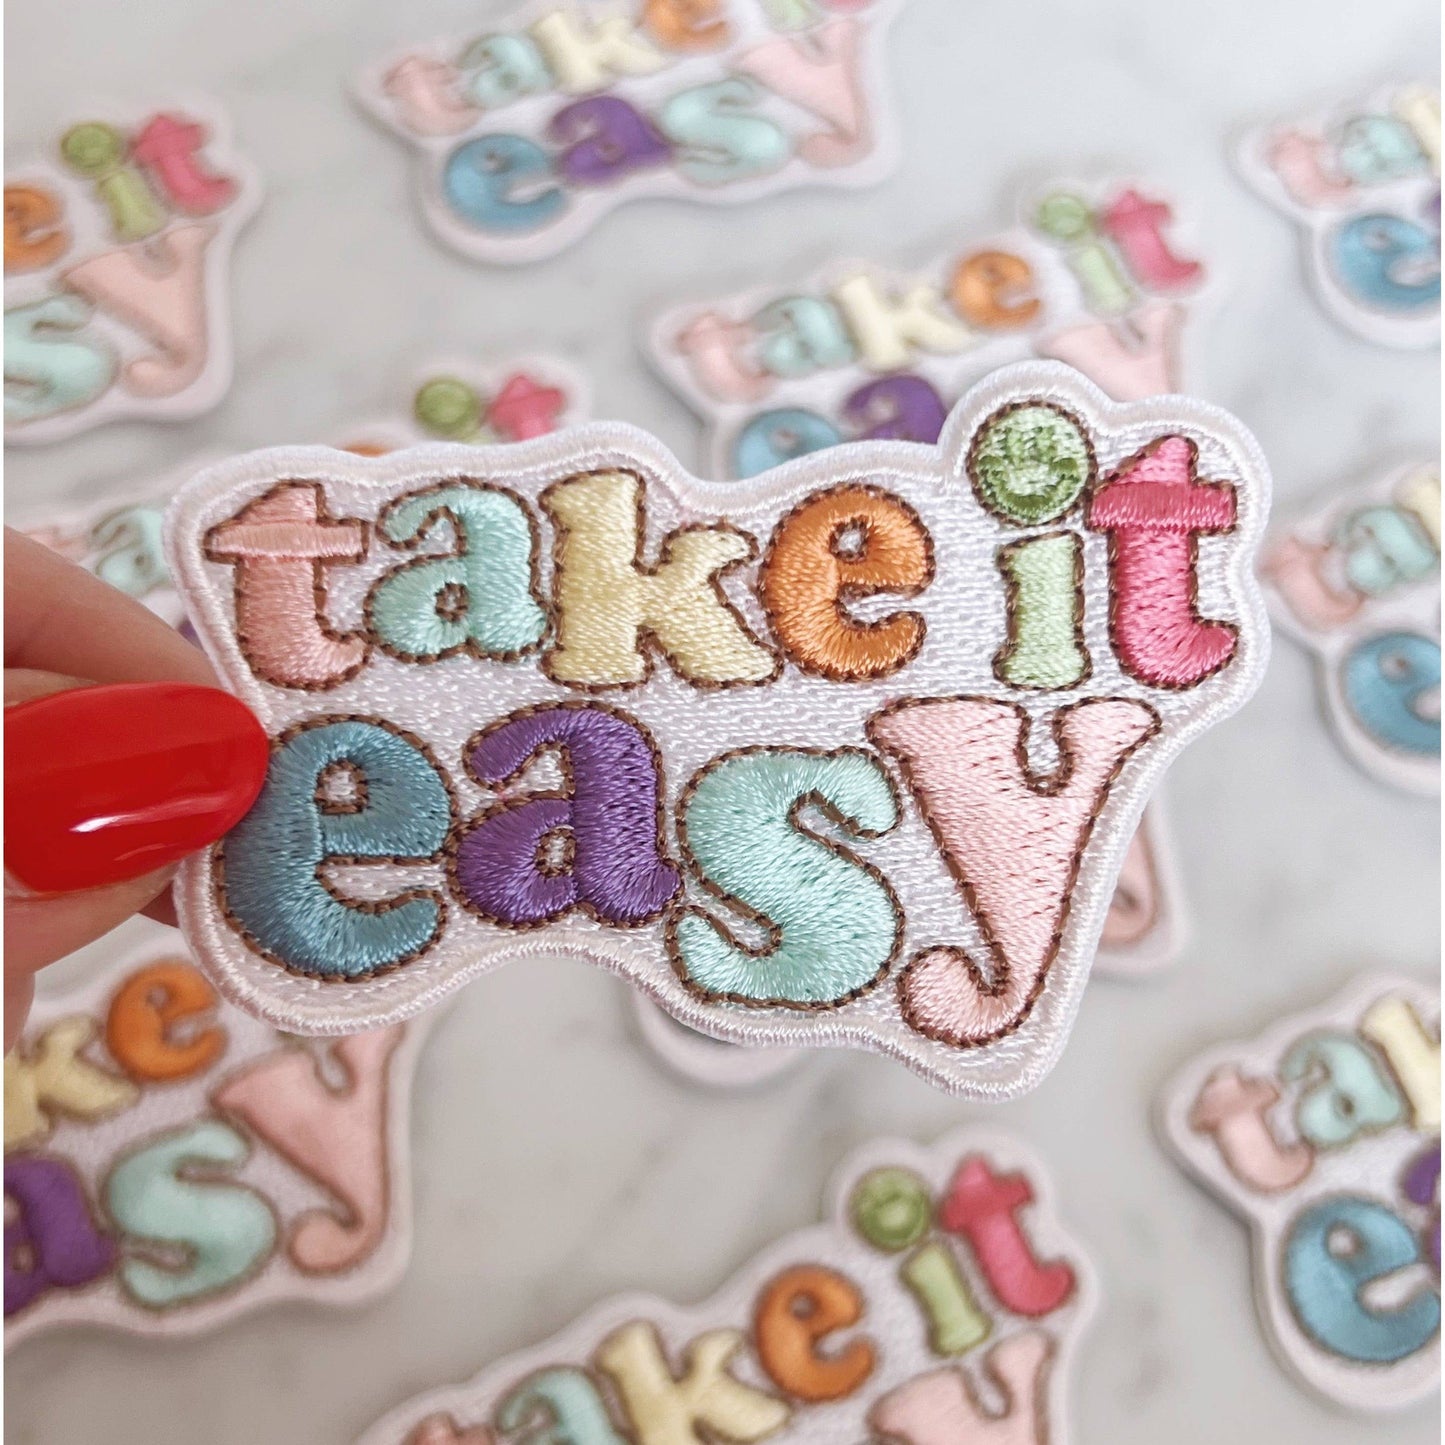 Take it Easy Patch | Colorful Embroidered Inspirational Quote Applique